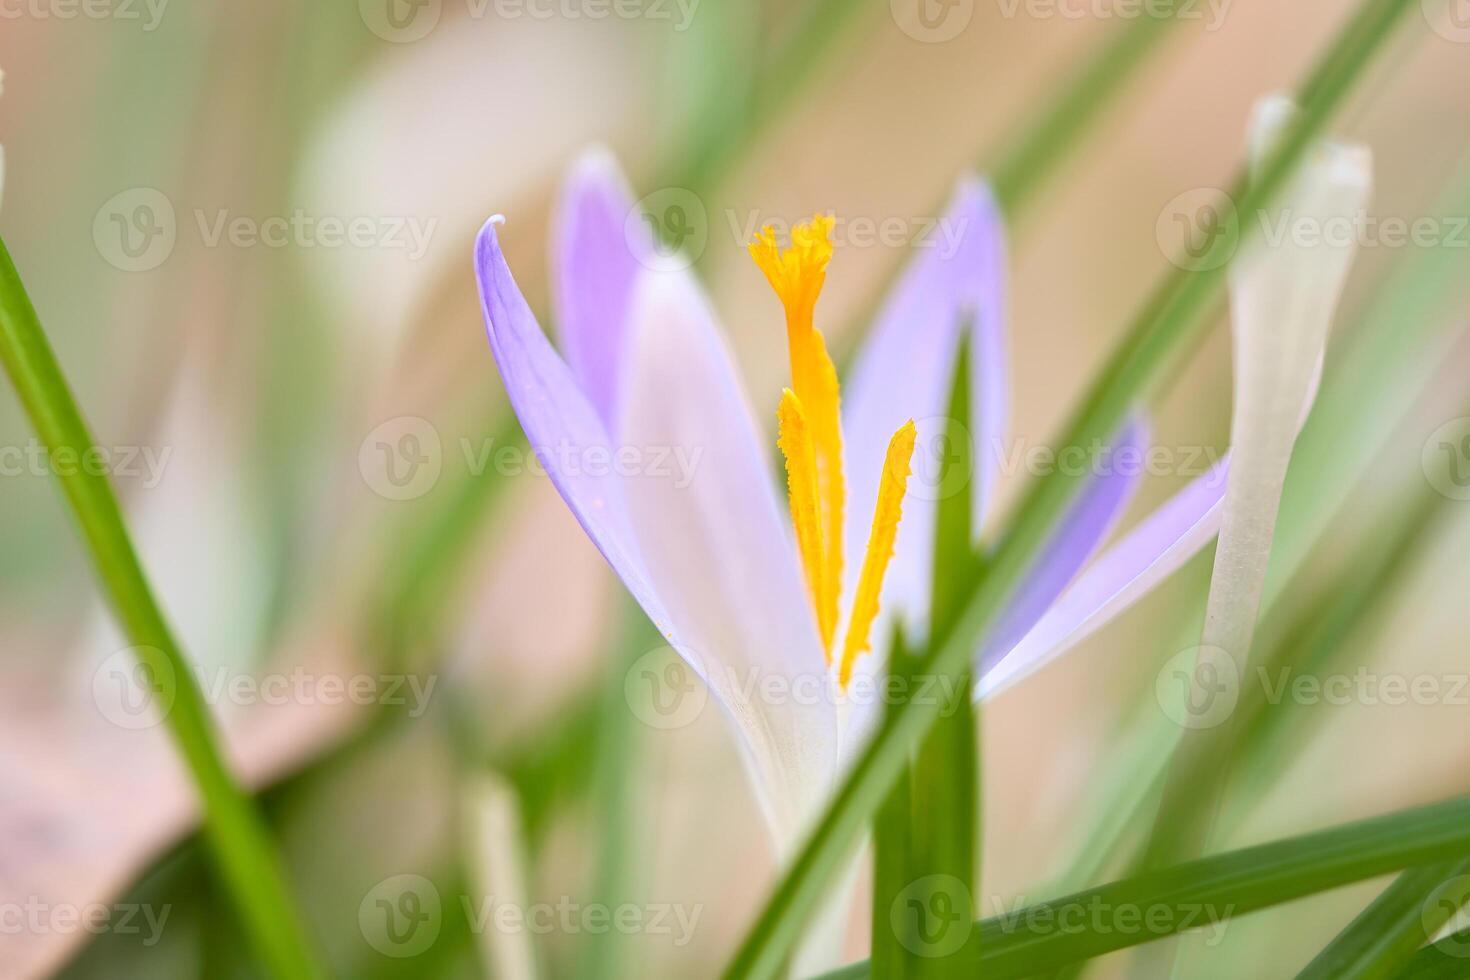 Single crocus flower delicately depicted in soft warm light. Spring flowers photo